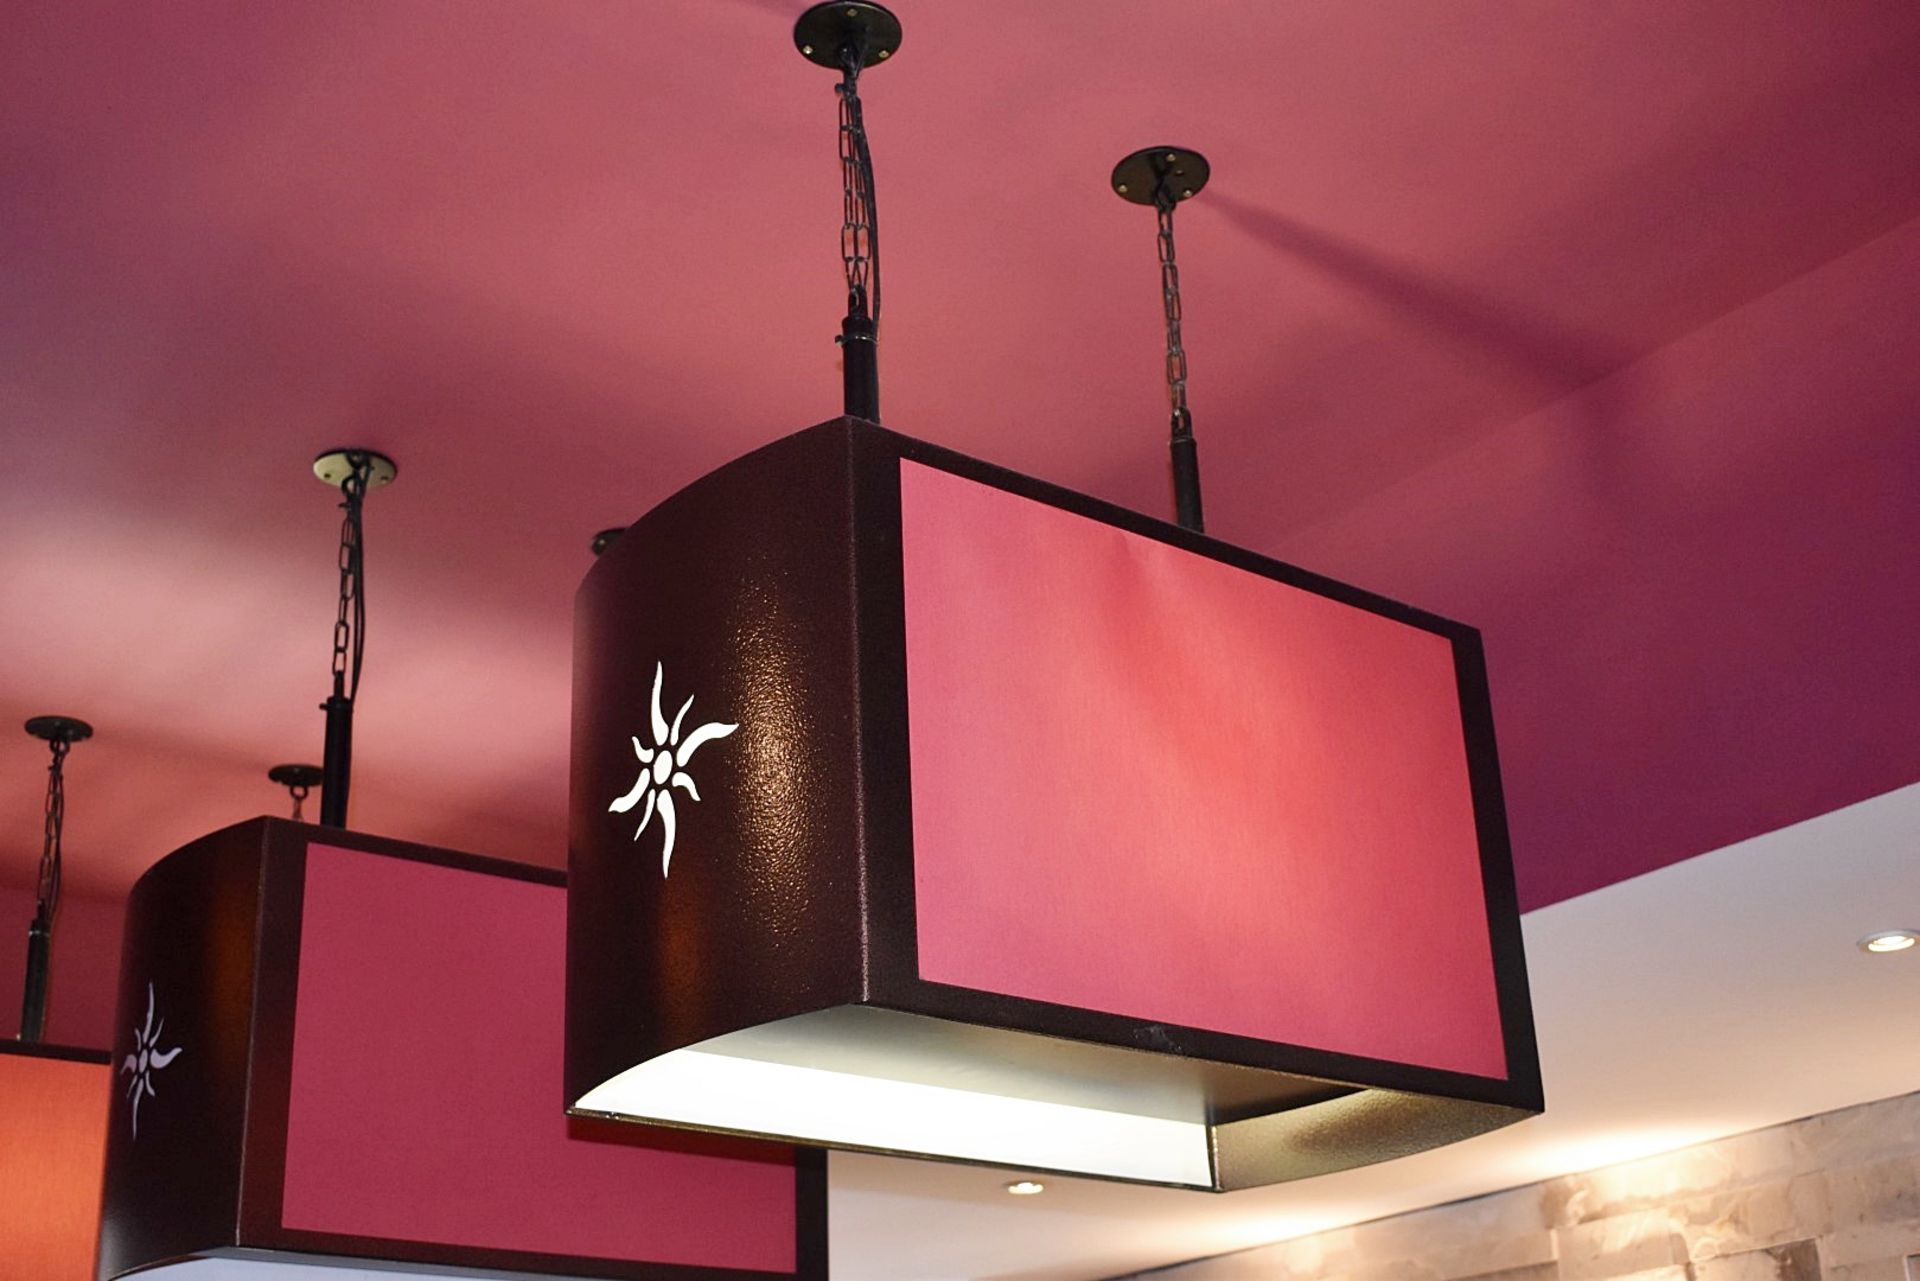 3 x Contemporary Suspended Ceiling Lights in Brown With Cut Out Star Design & Red Fabric Shade Sides - Image 3 of 4